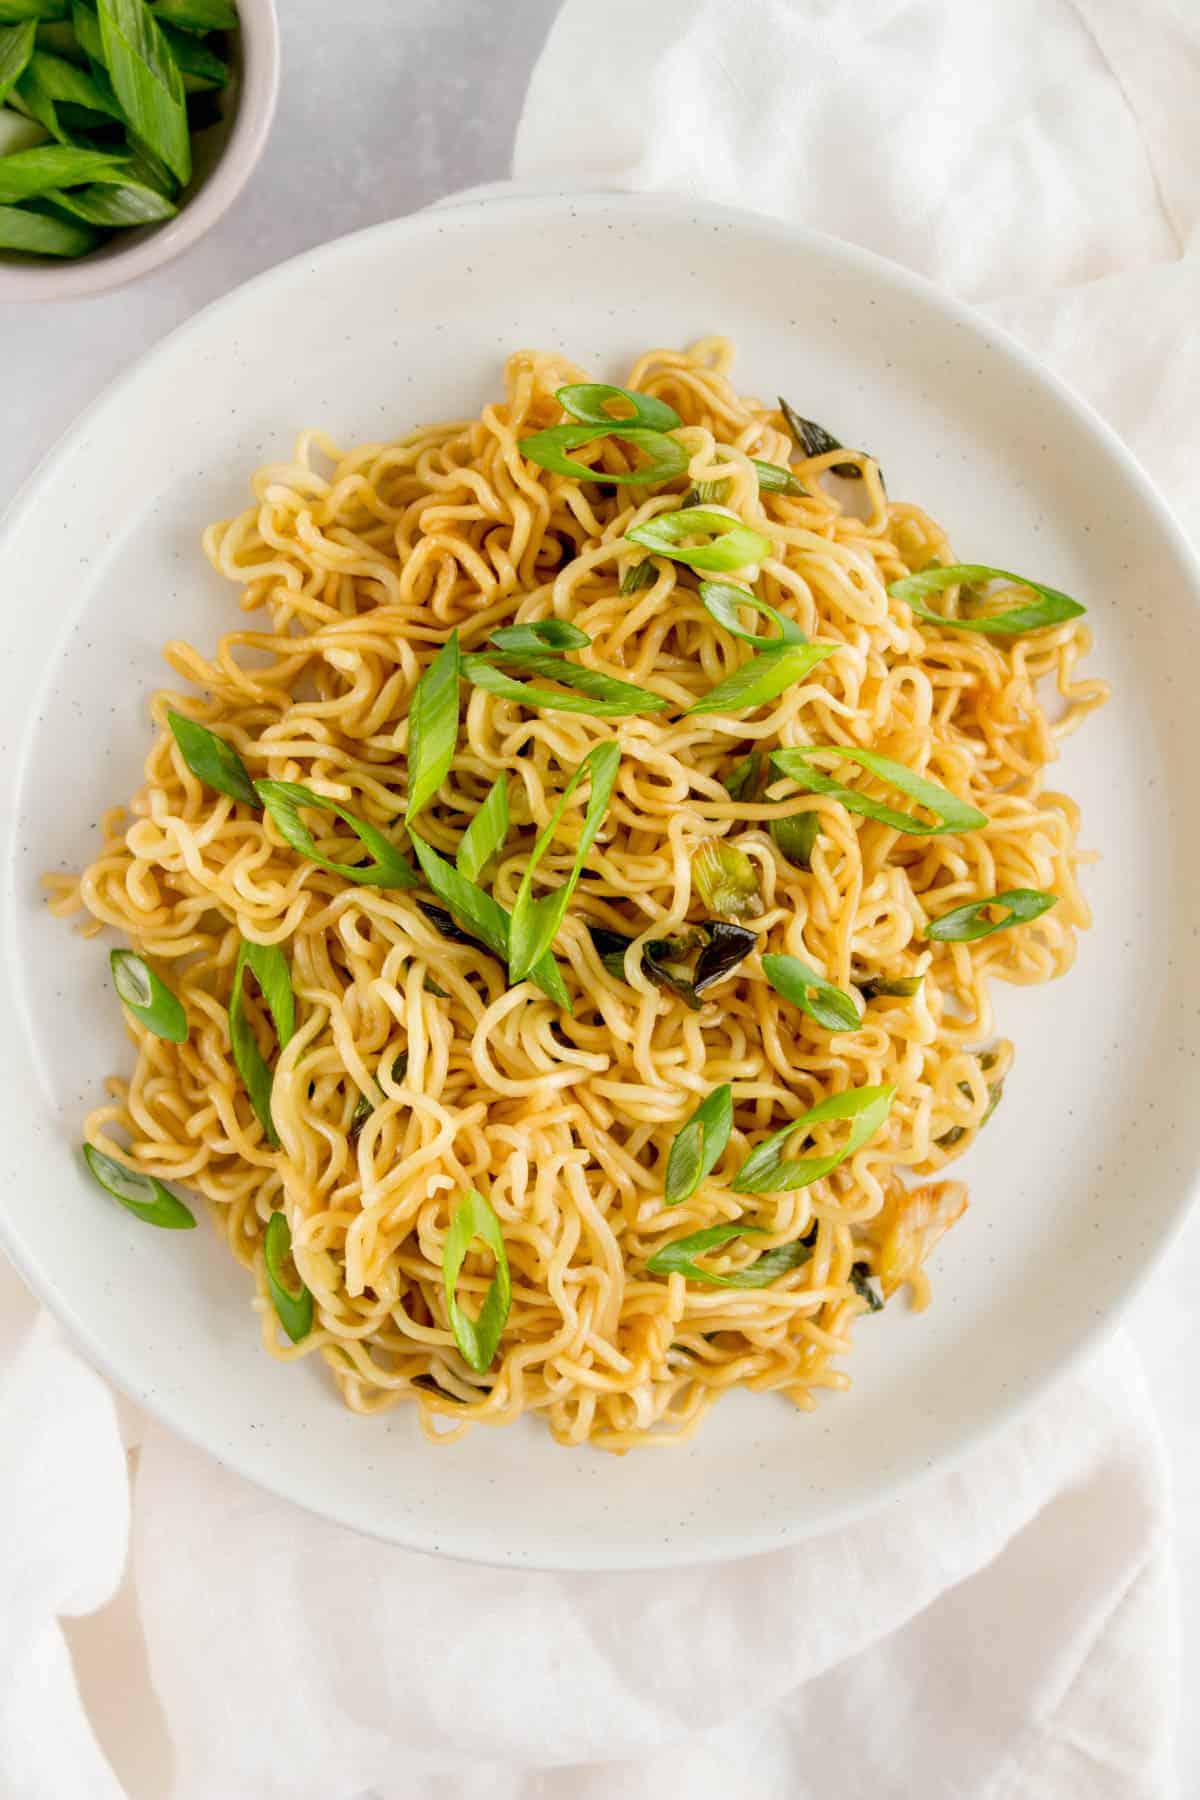 A plate of scallion noodles with sliced scallions as garnish.